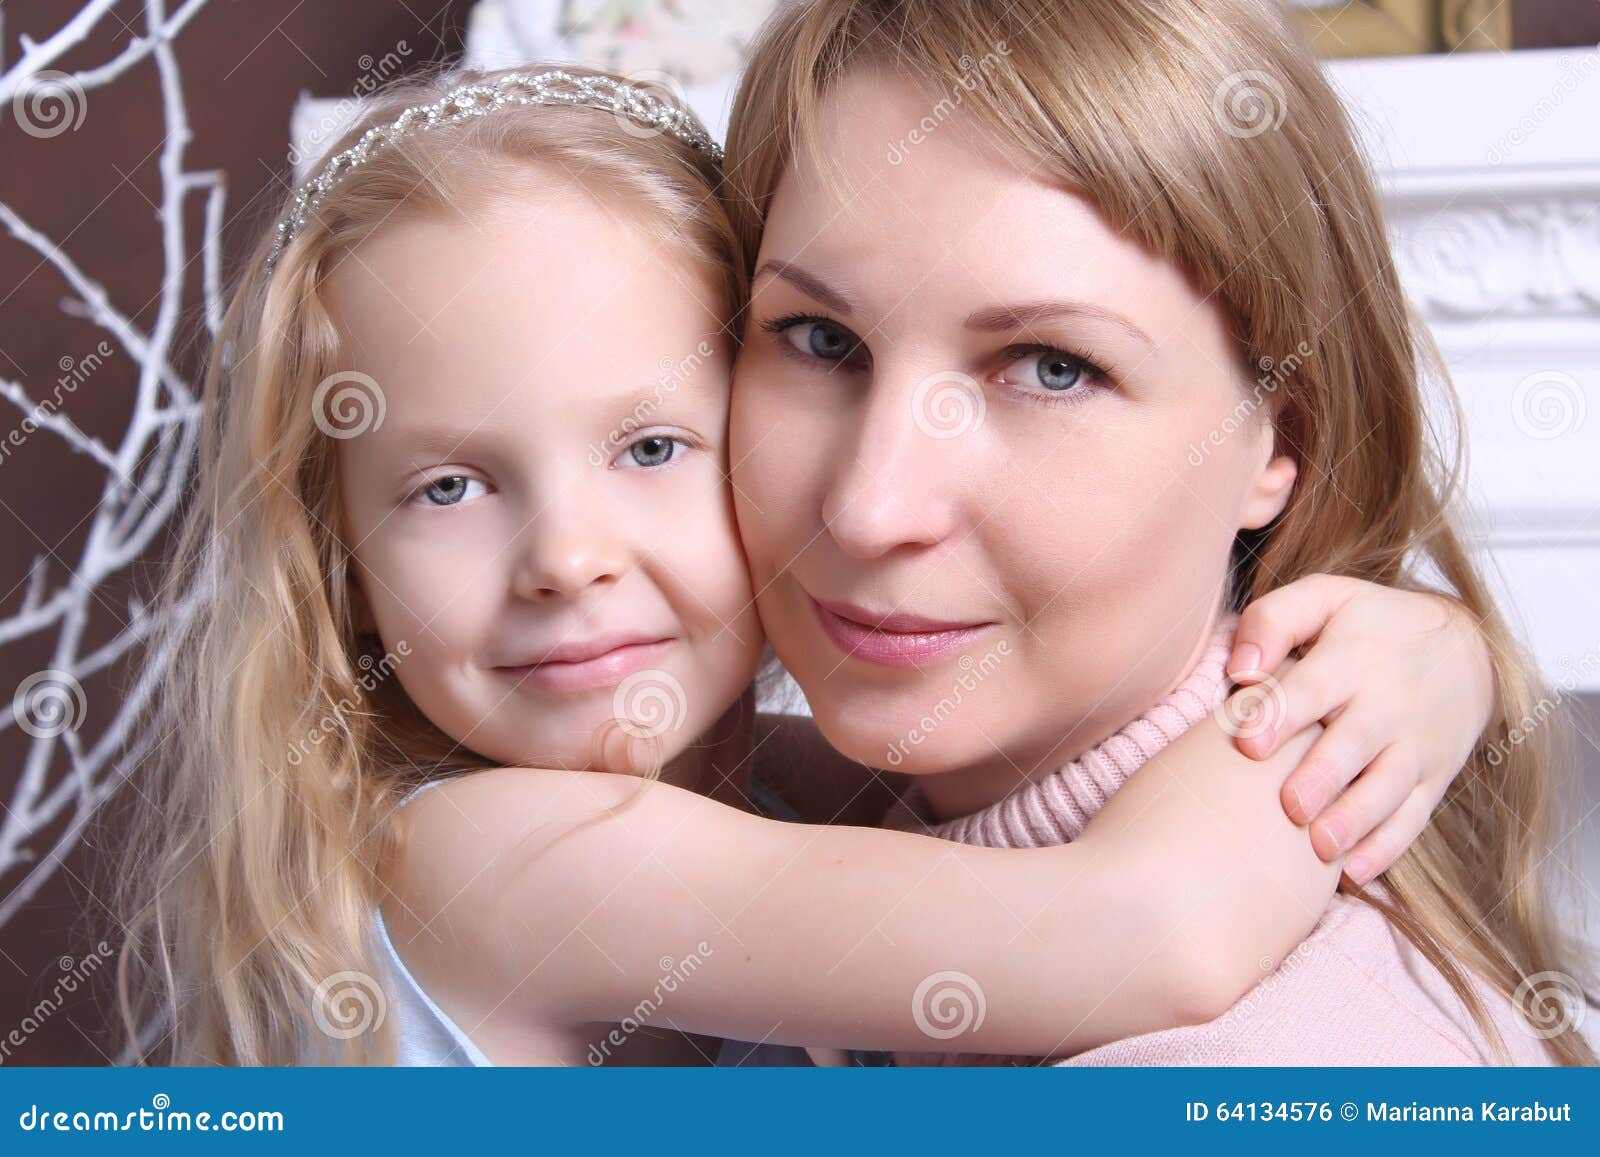 Family Concept. Mom And Daughter. Stock Photo - Image: 64134576